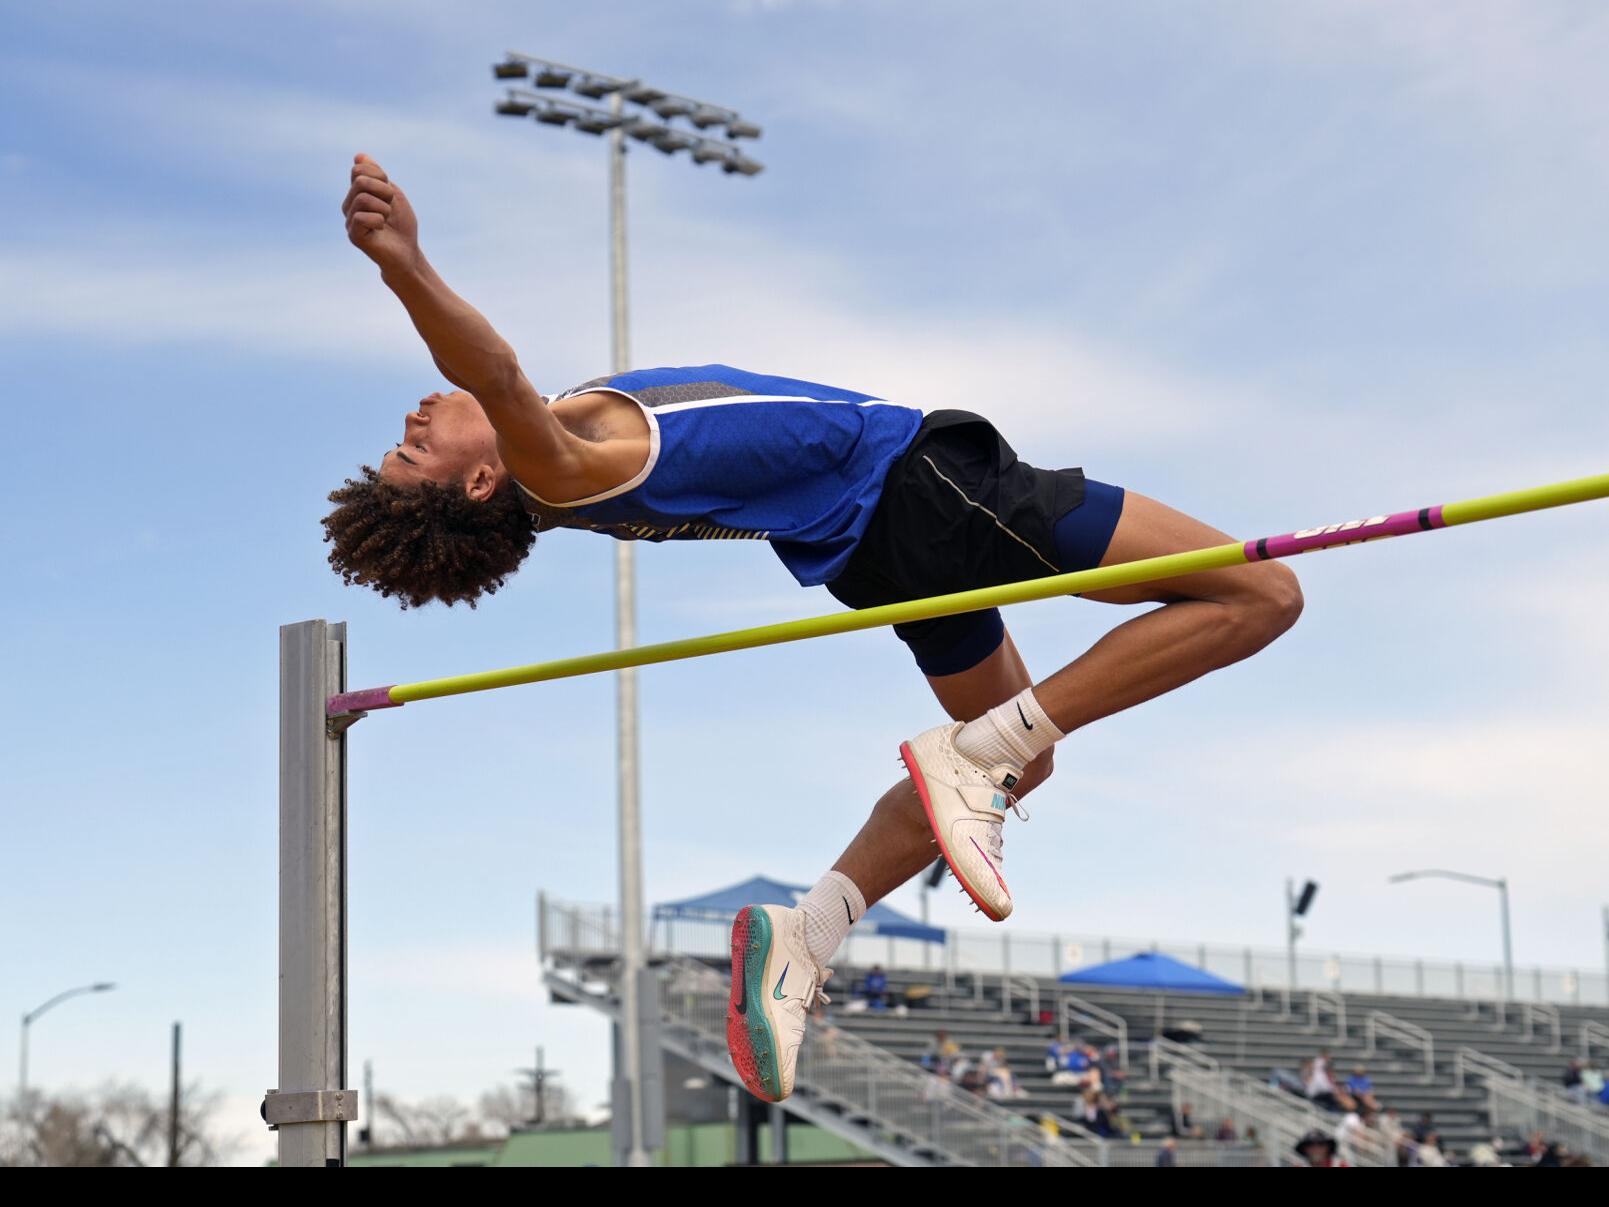 De Beque's track tradition — the high jump